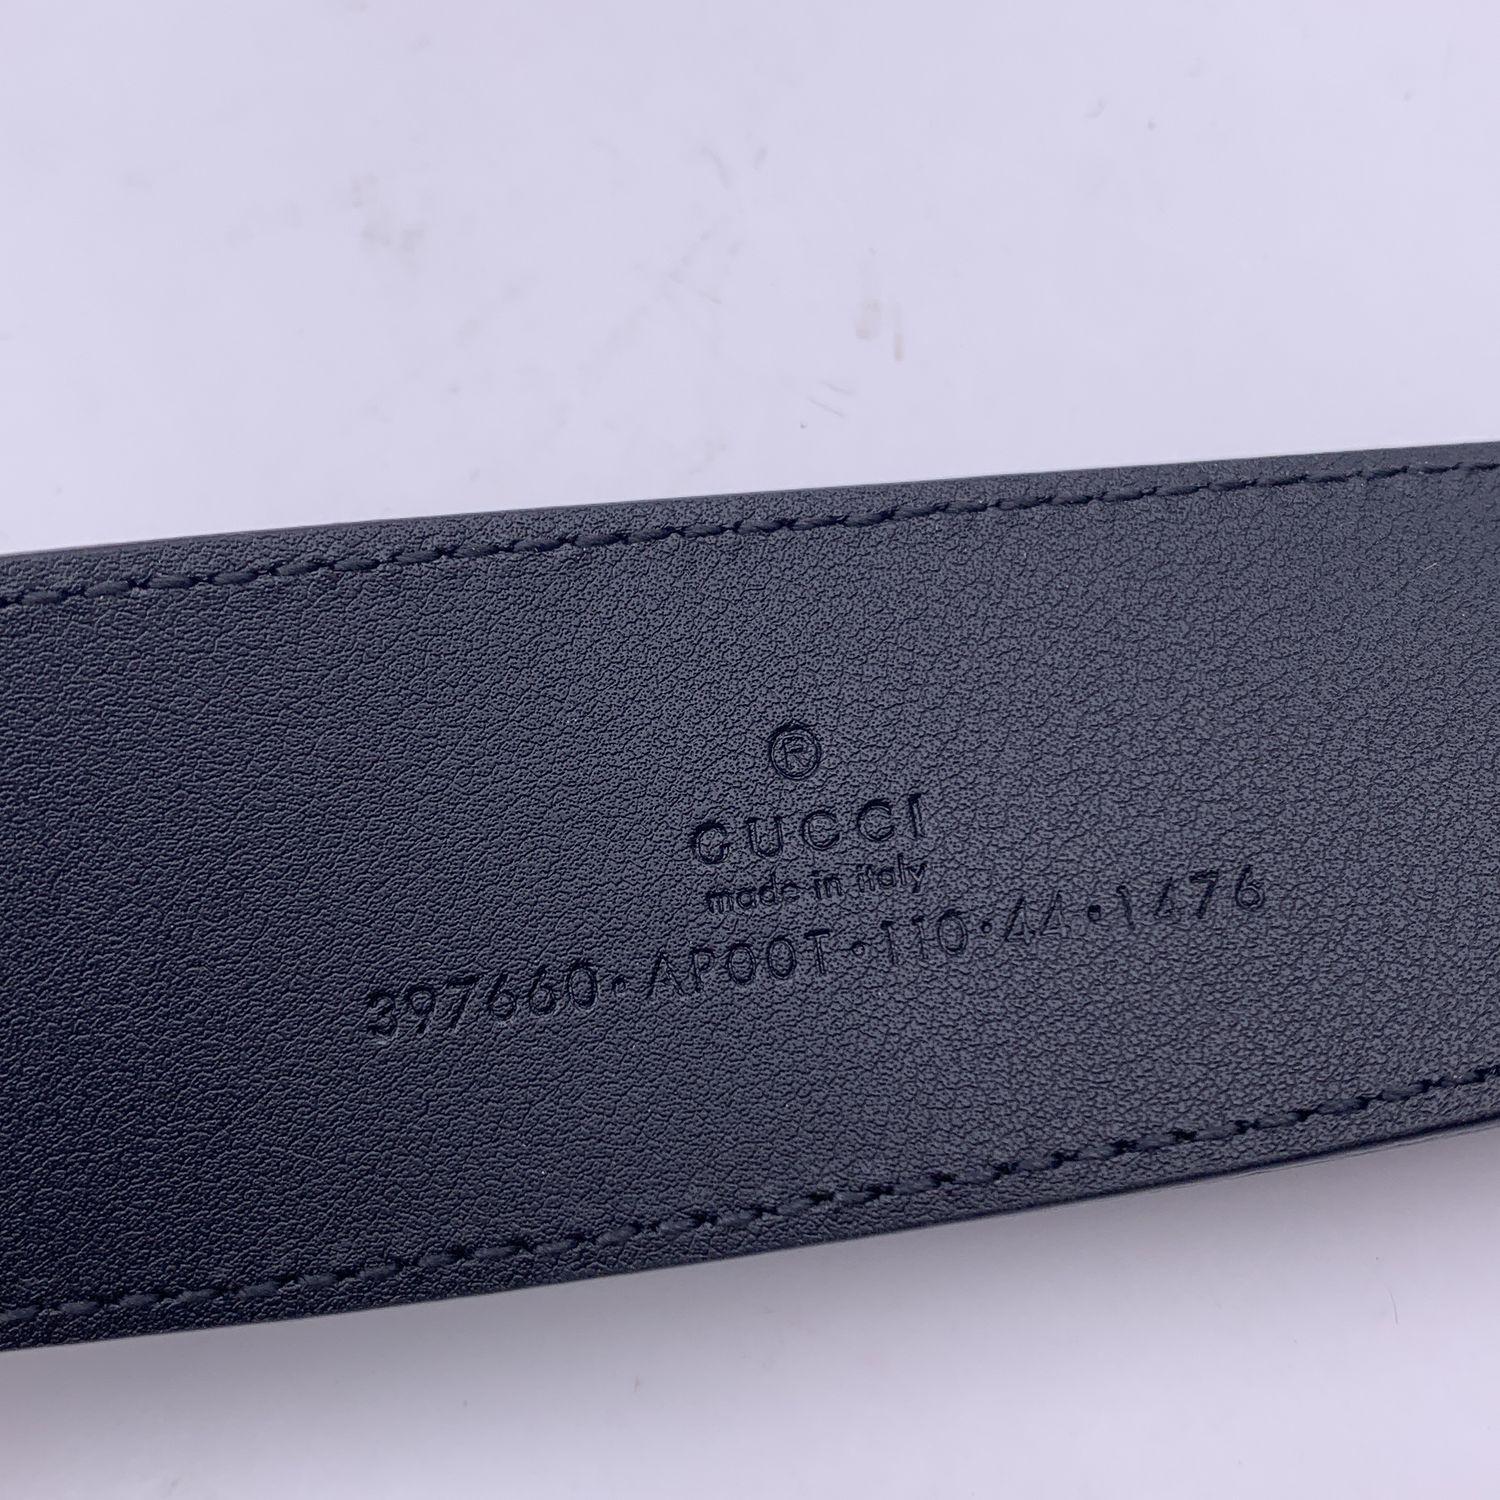 Gucci Black Leather Marmont Belt with GG Buckle Size 110/44 In Excellent Condition In Rome, Rome